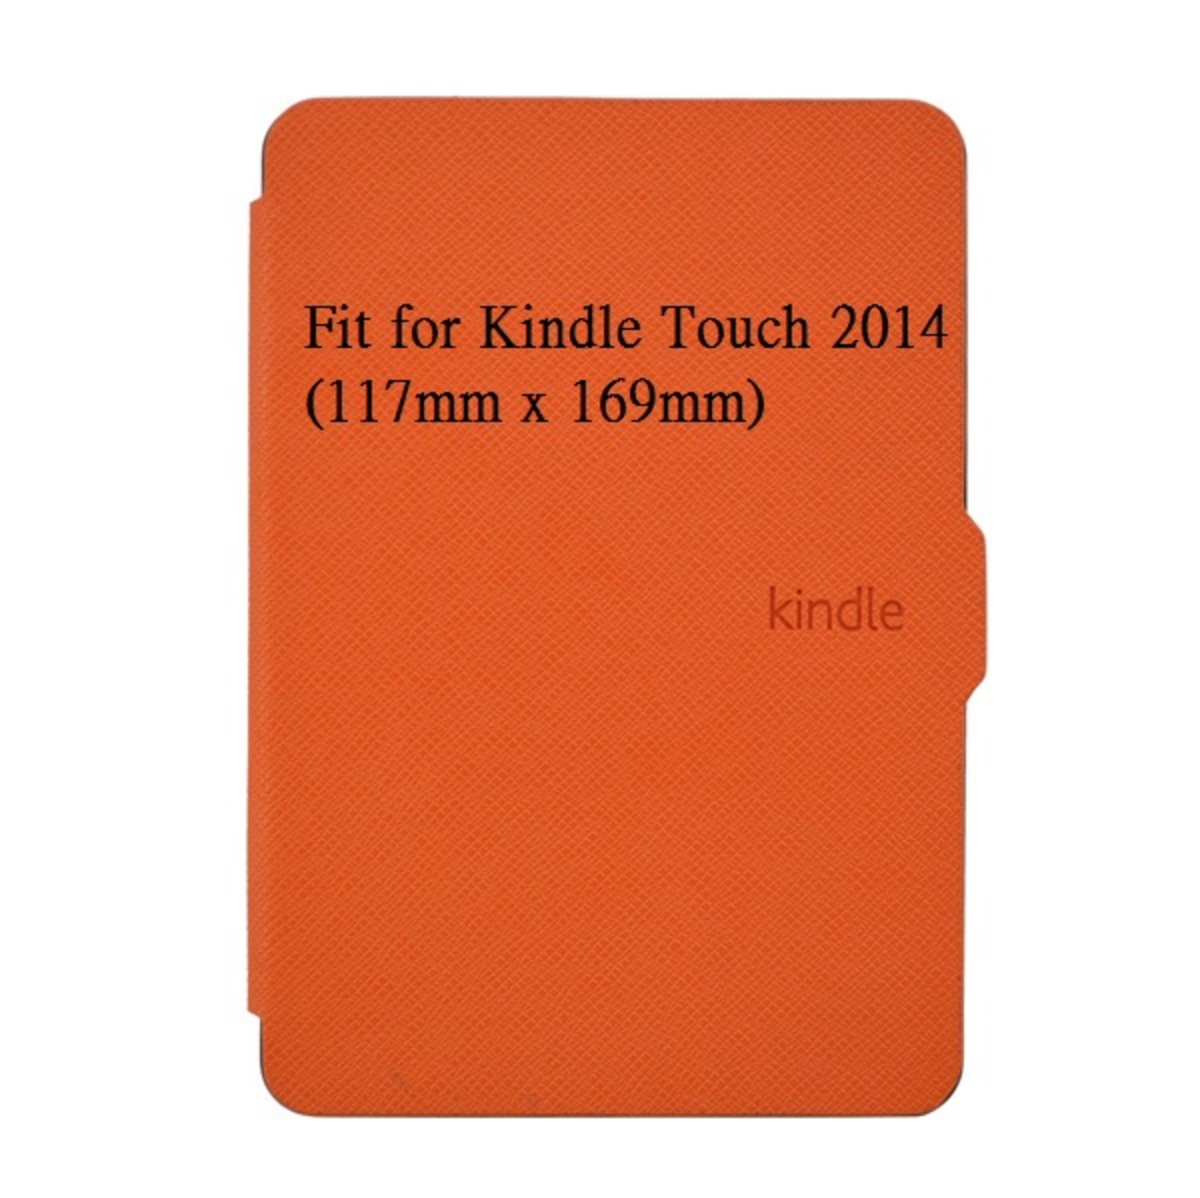 Touch 2014 case (Orange) for 2014 version (fit for 117mm x 169mm)